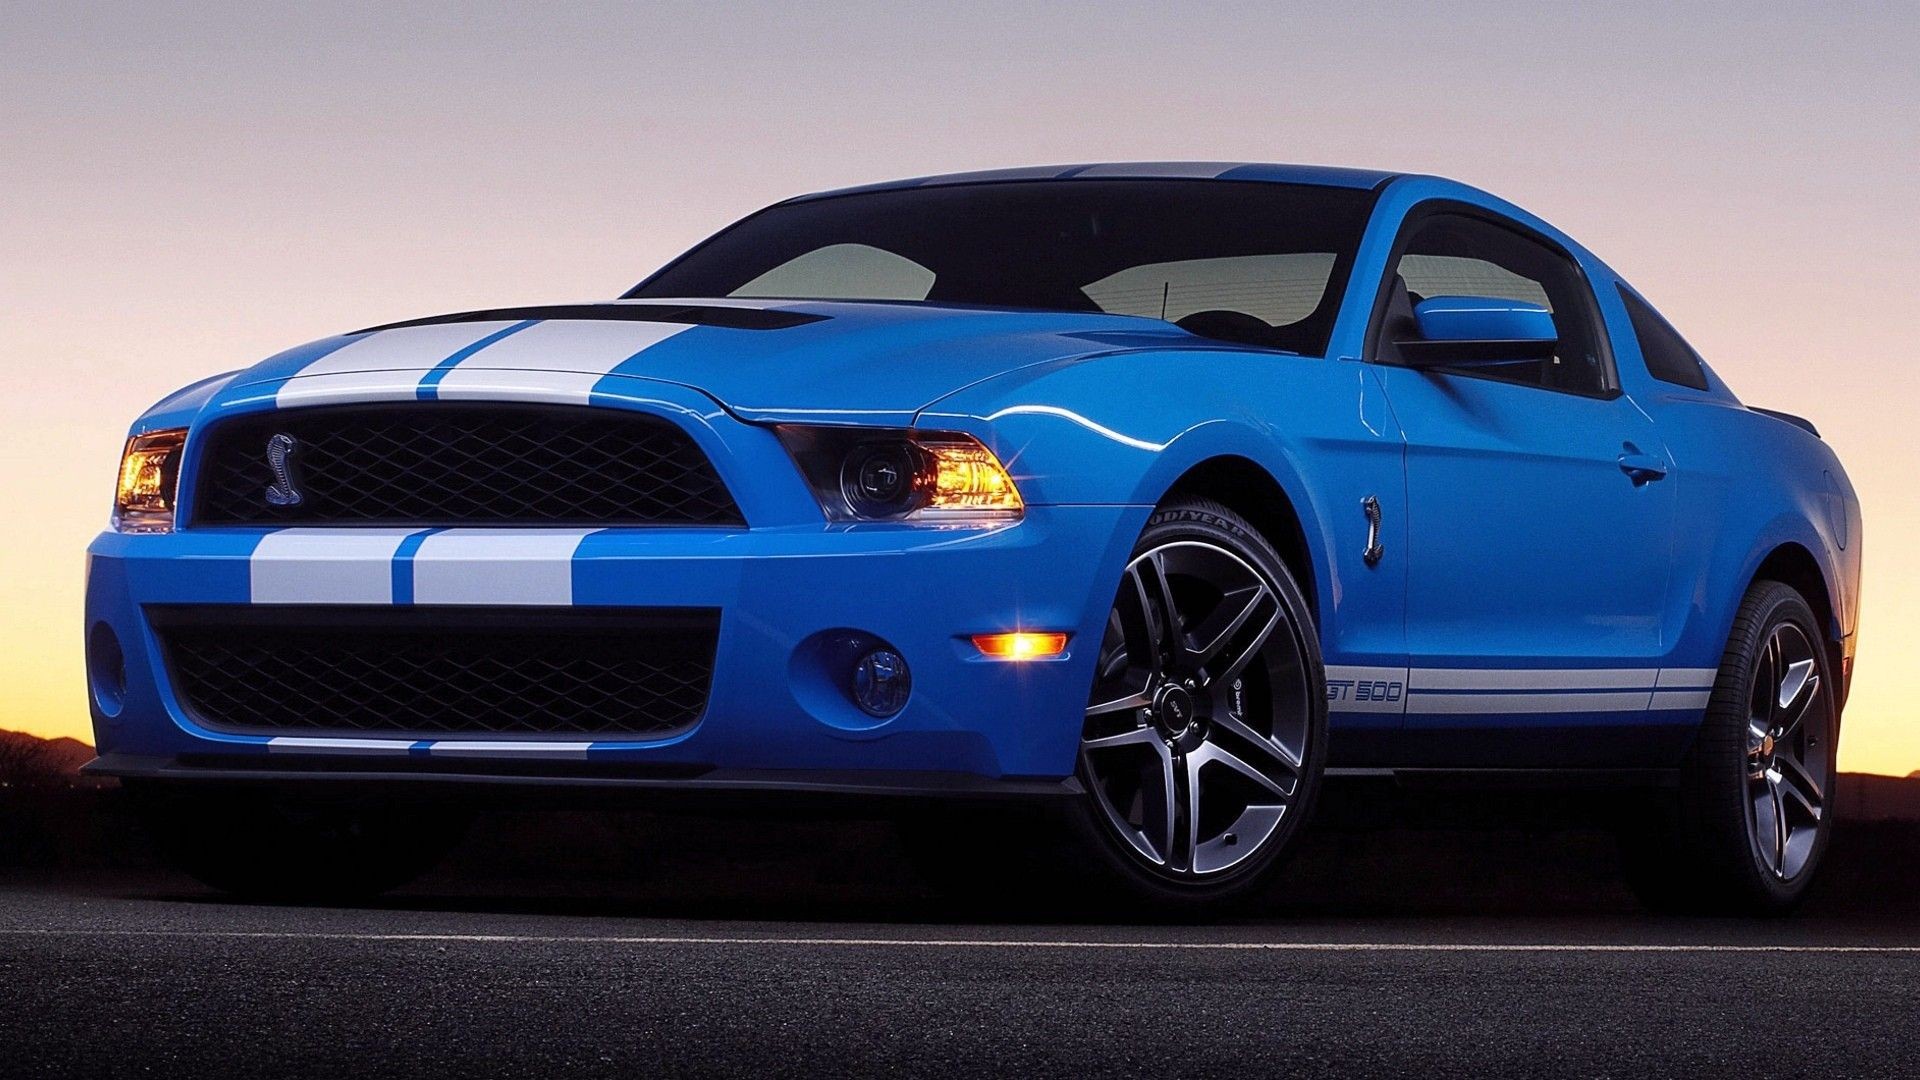 General 1920x1080 car Ford Mustang Shelby Ford Mustang blue Ford Shelby blue cars vehicle Ford Mustang S-197 II American cars